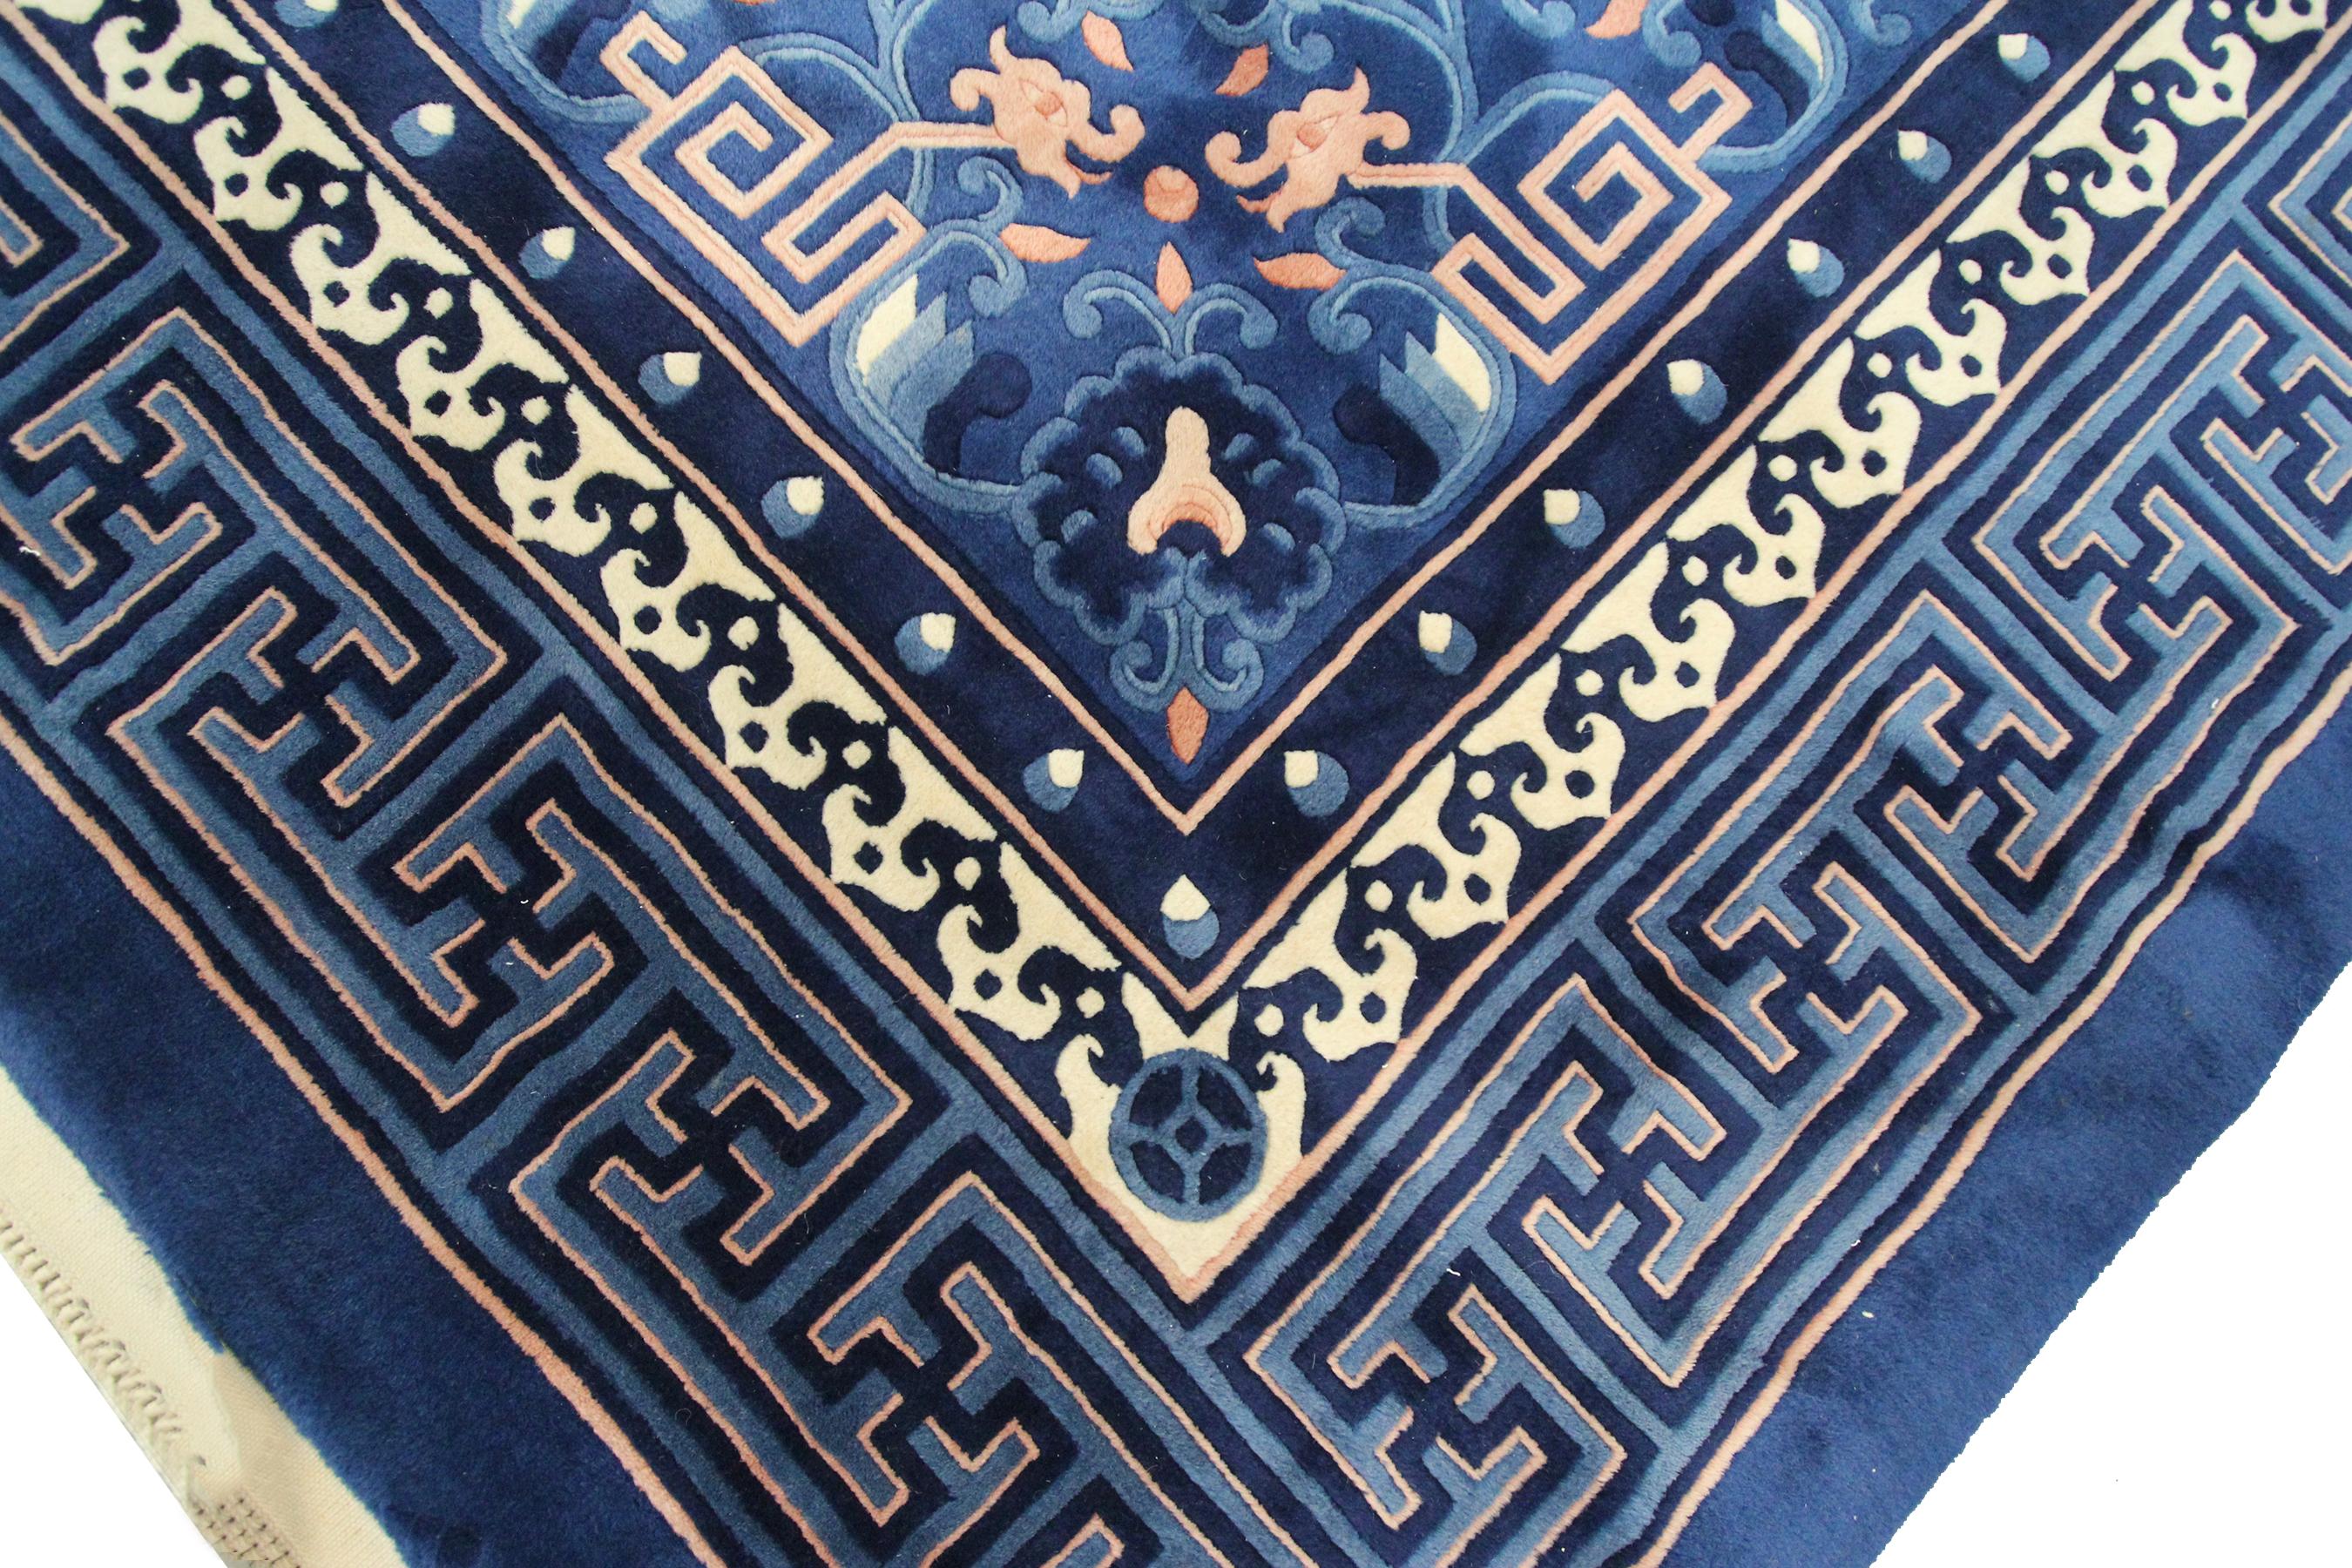 Vintage Chinese Art Deco Rug Geometric Chinese Rug Dragons 1960 For Sale 1